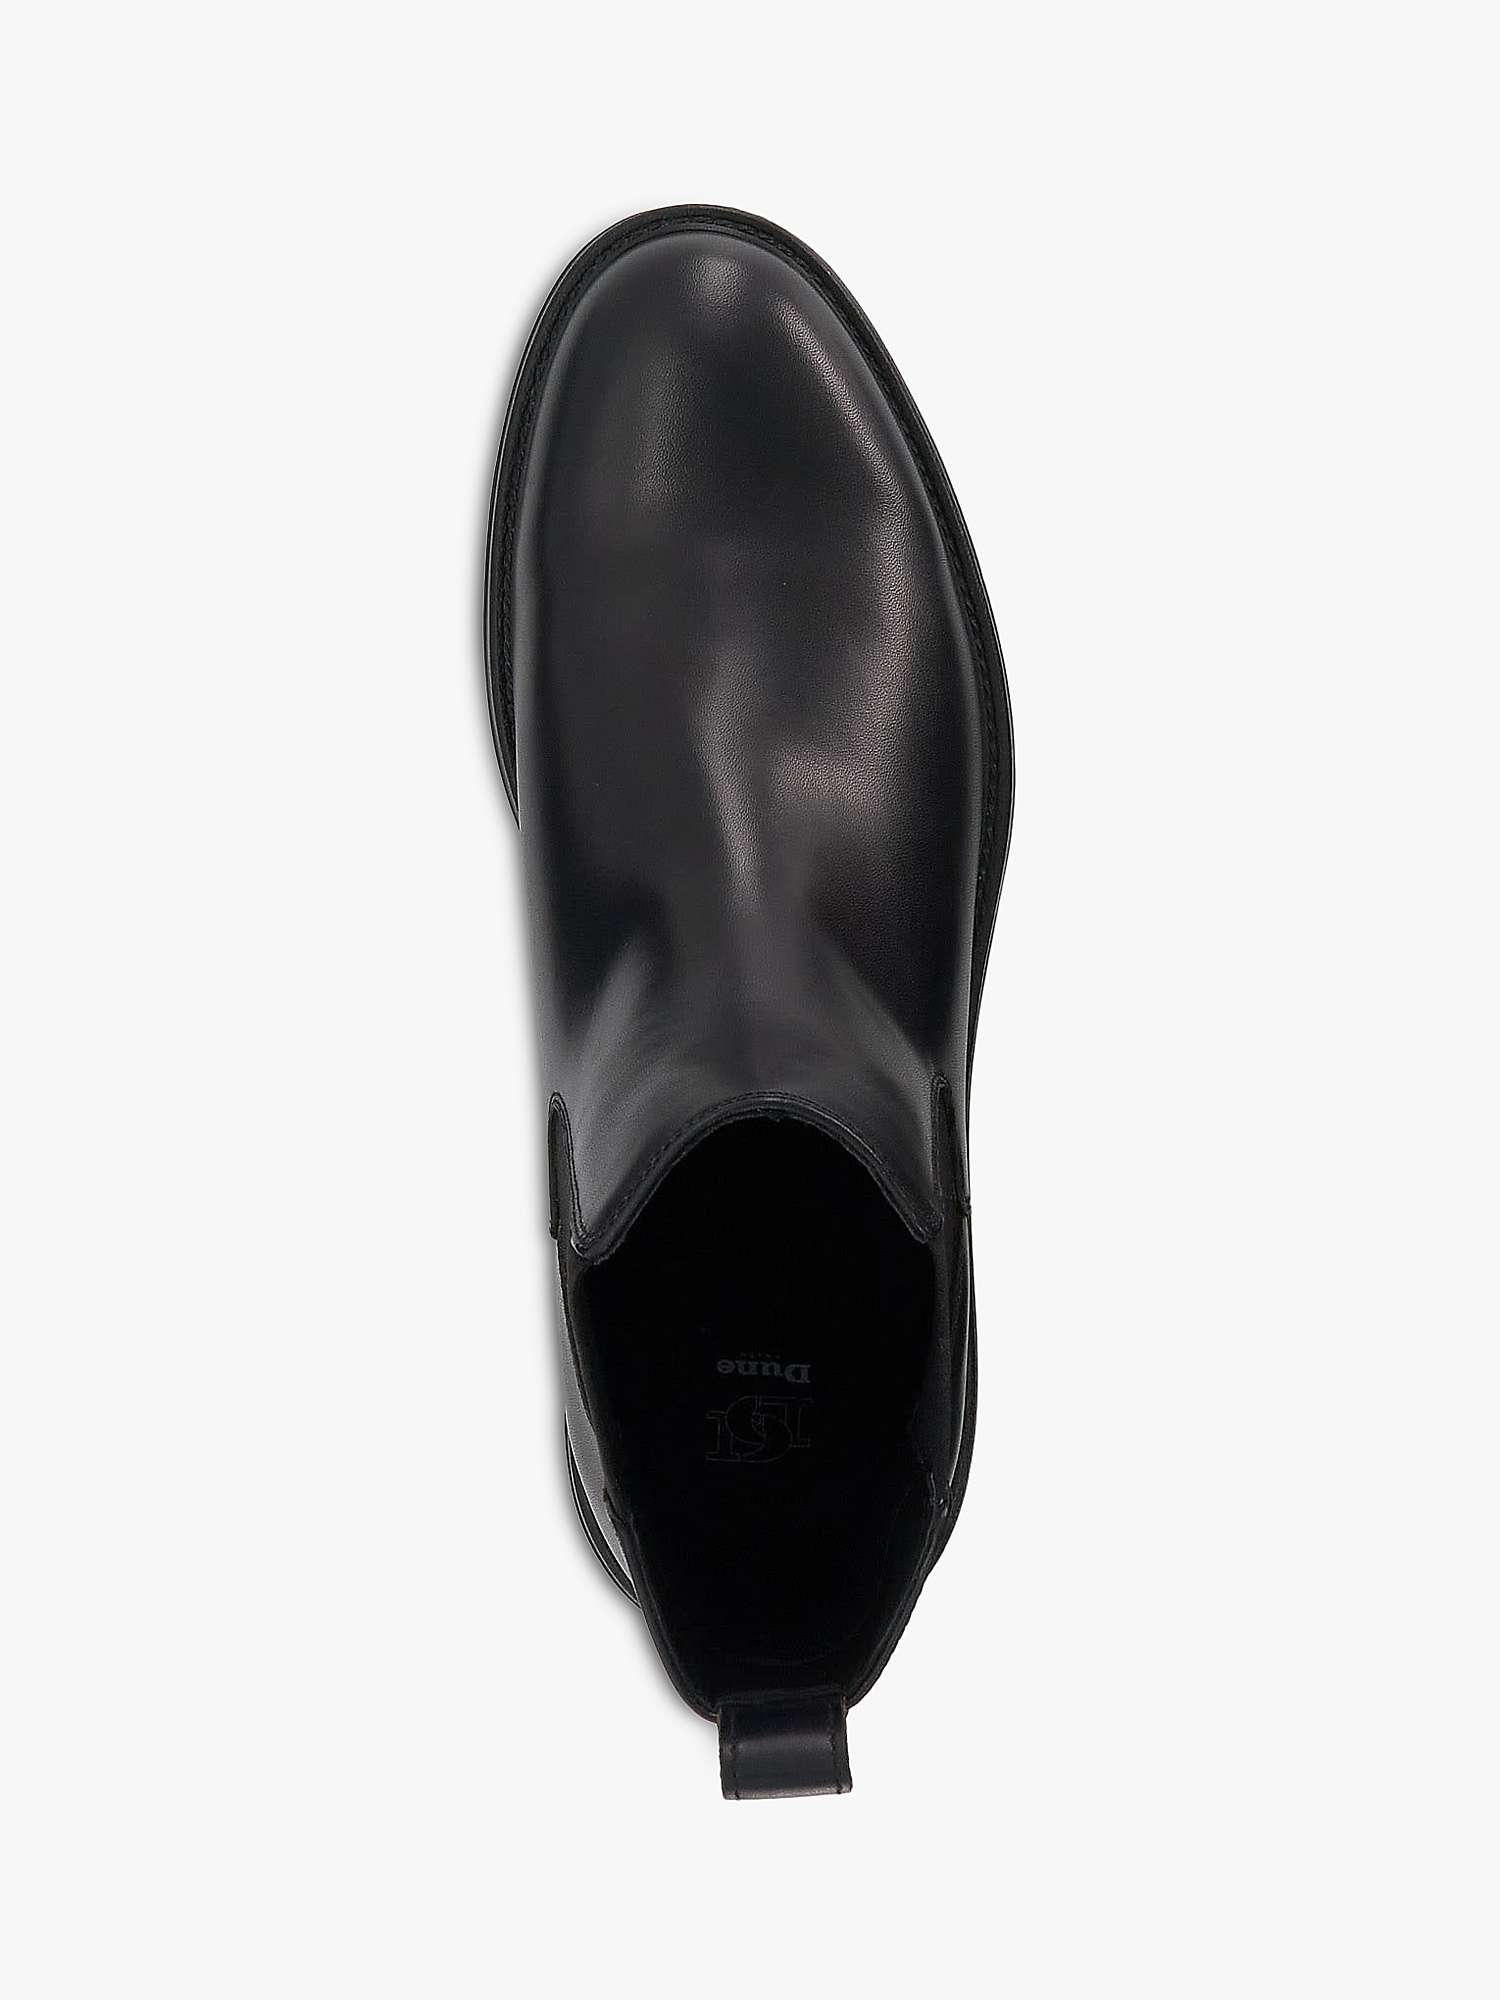 Buy Dune Created Leather Chelsea Boots, Black Online at johnlewis.com